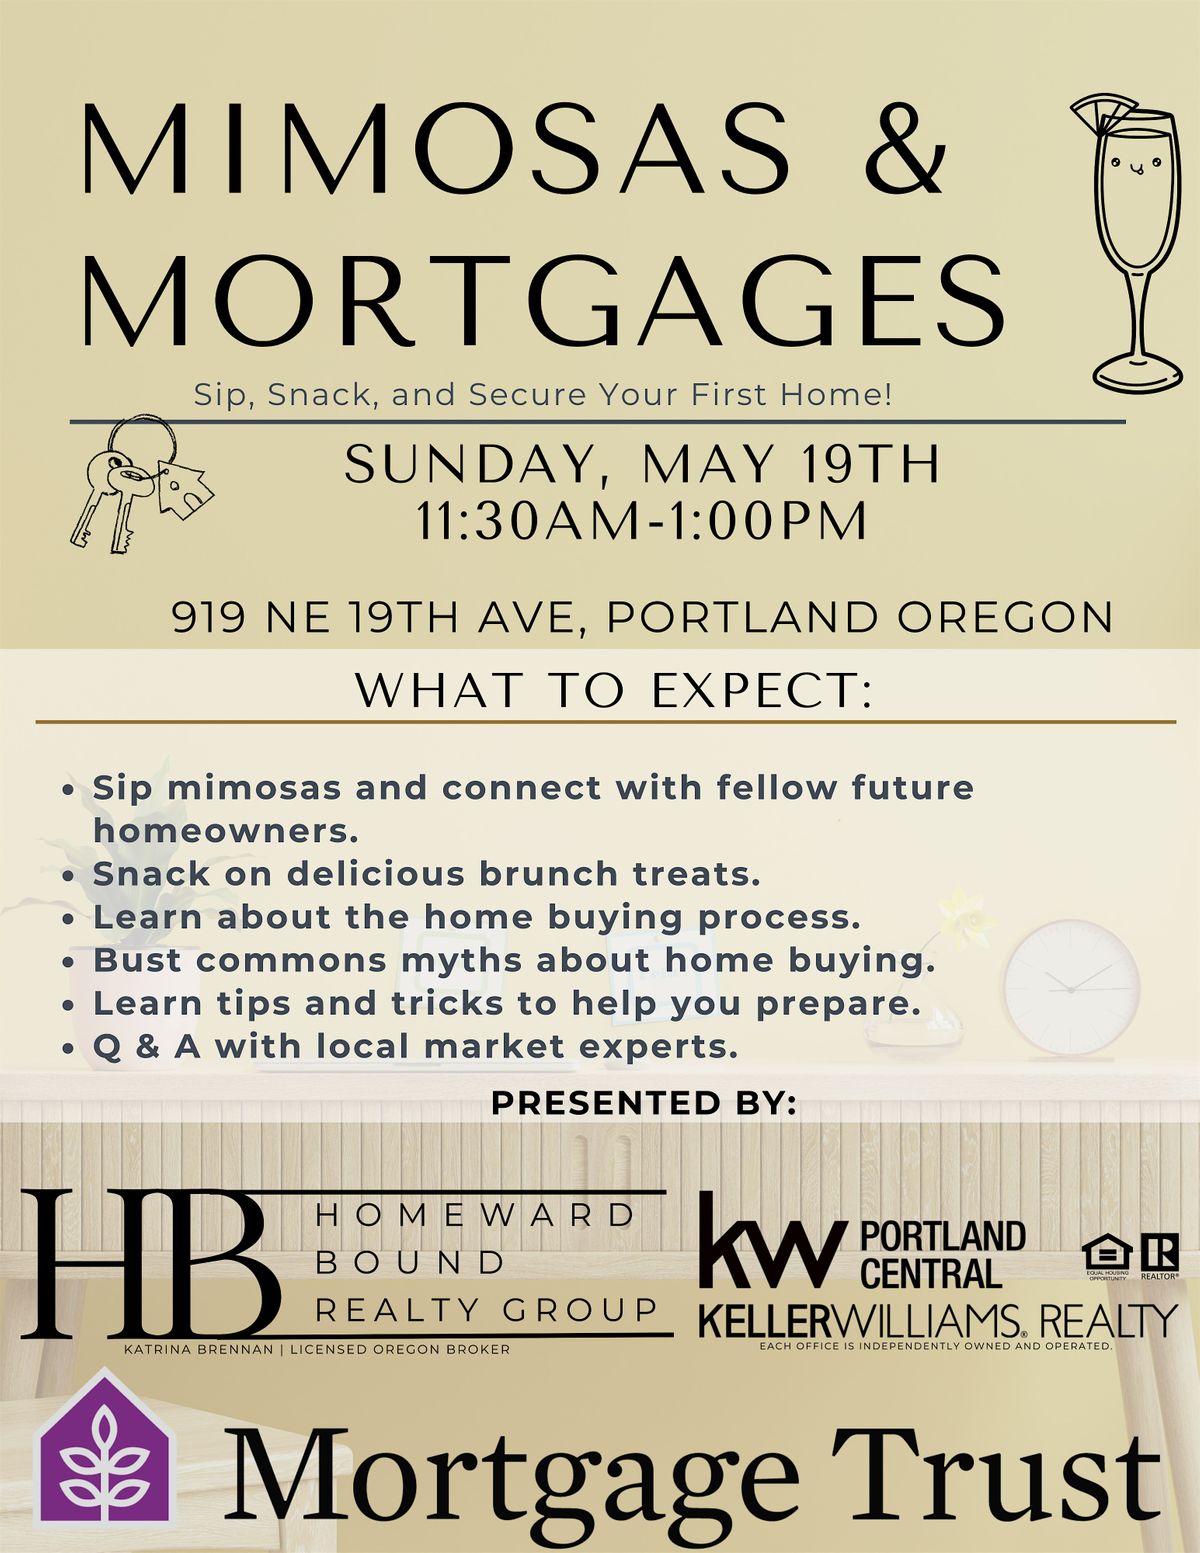 Mimosas & Mortgages